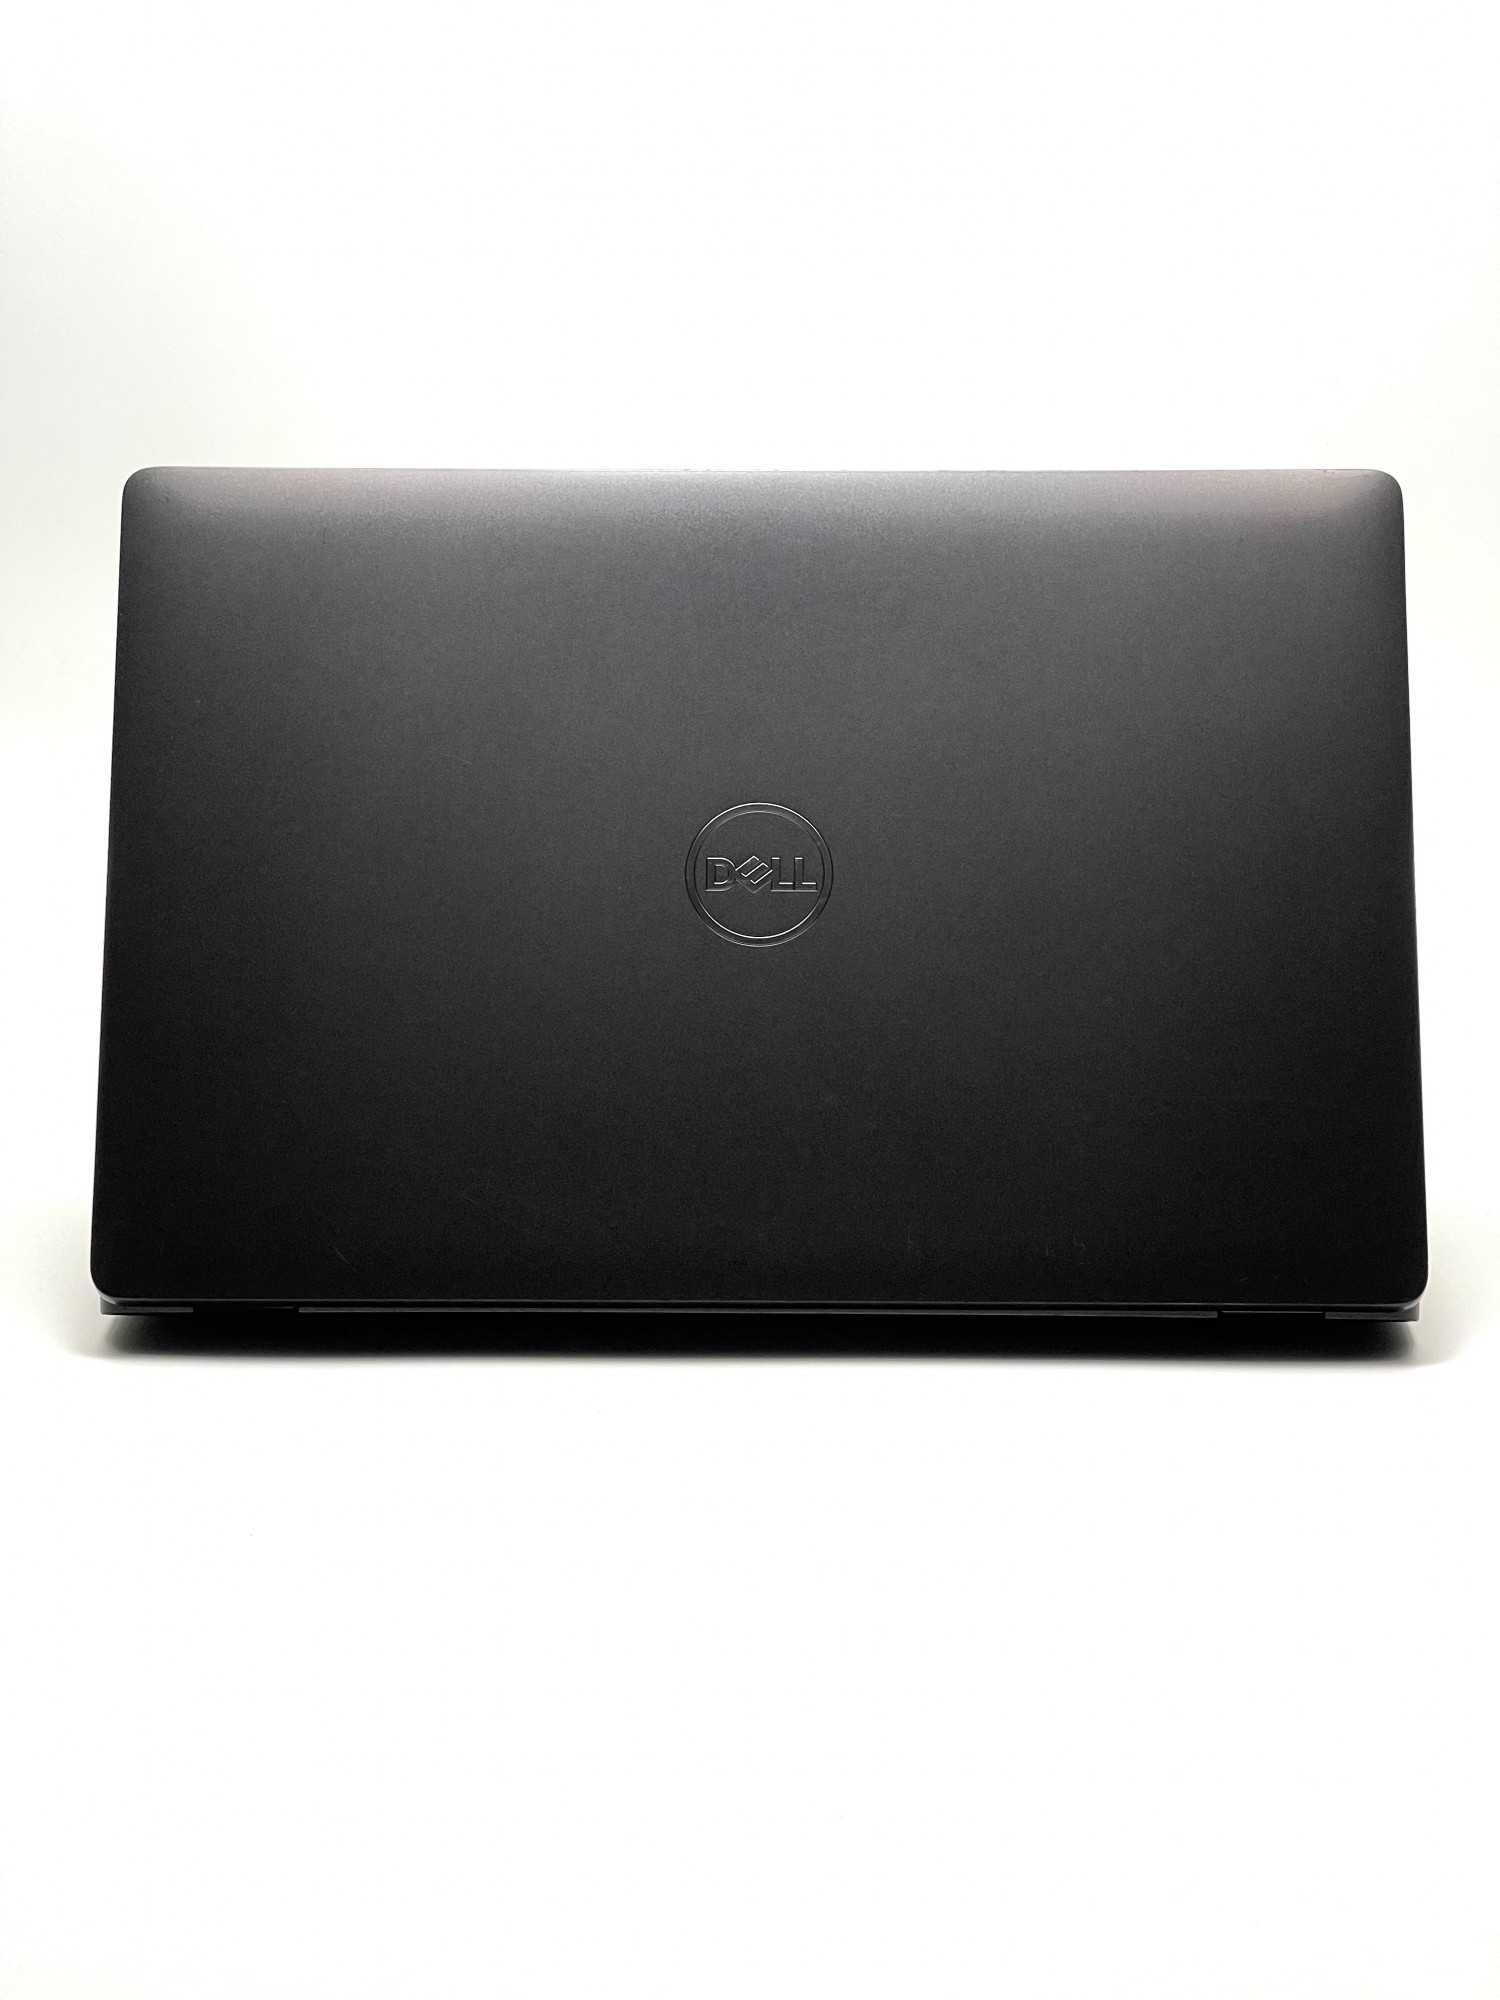 Dell Latitude 5500 | 15.6" FHD IPS Touch | I5-8365U 4,1 GHz